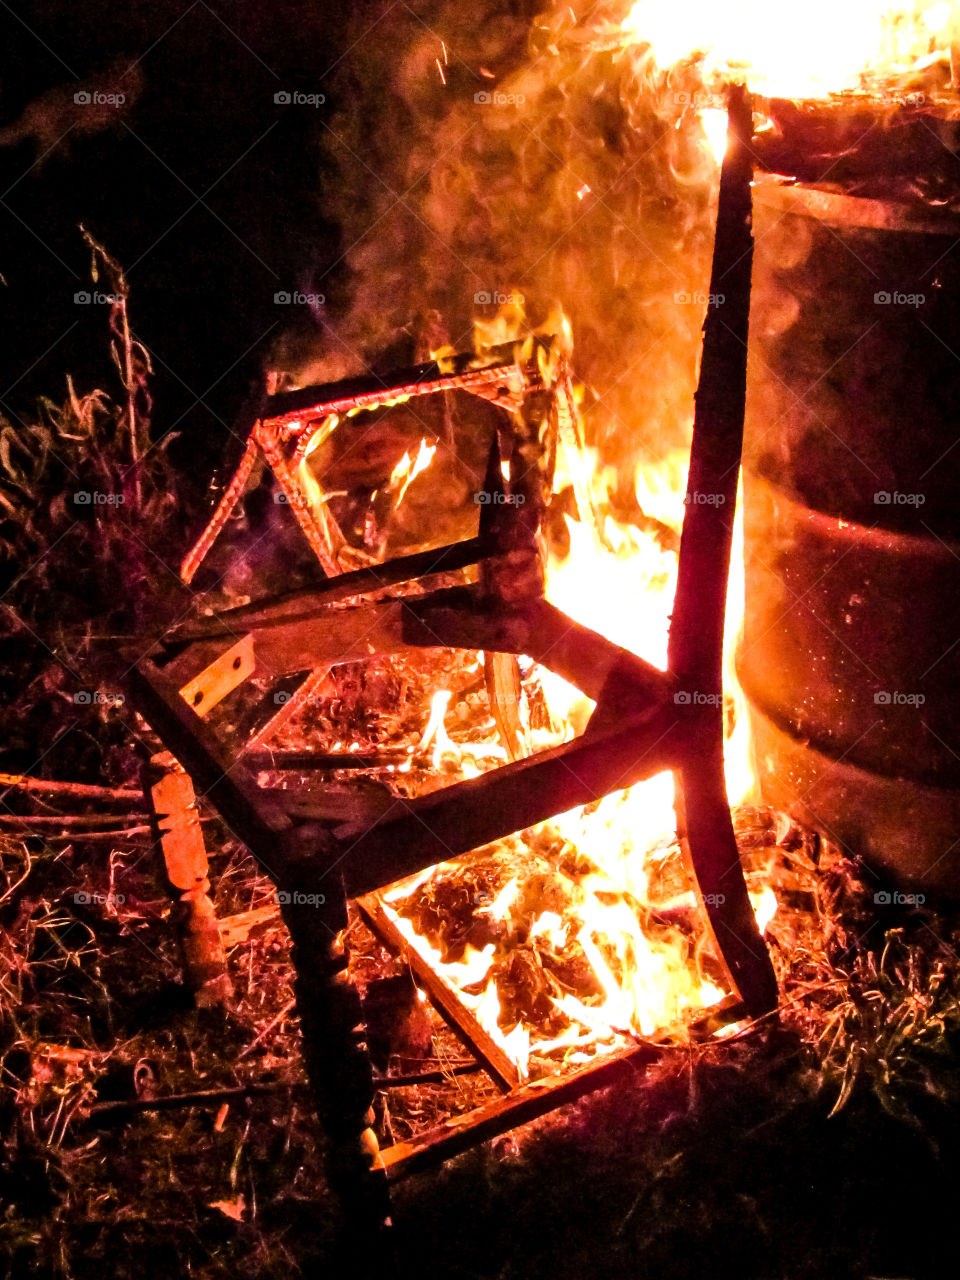 wooden chair on fire at night outdoors